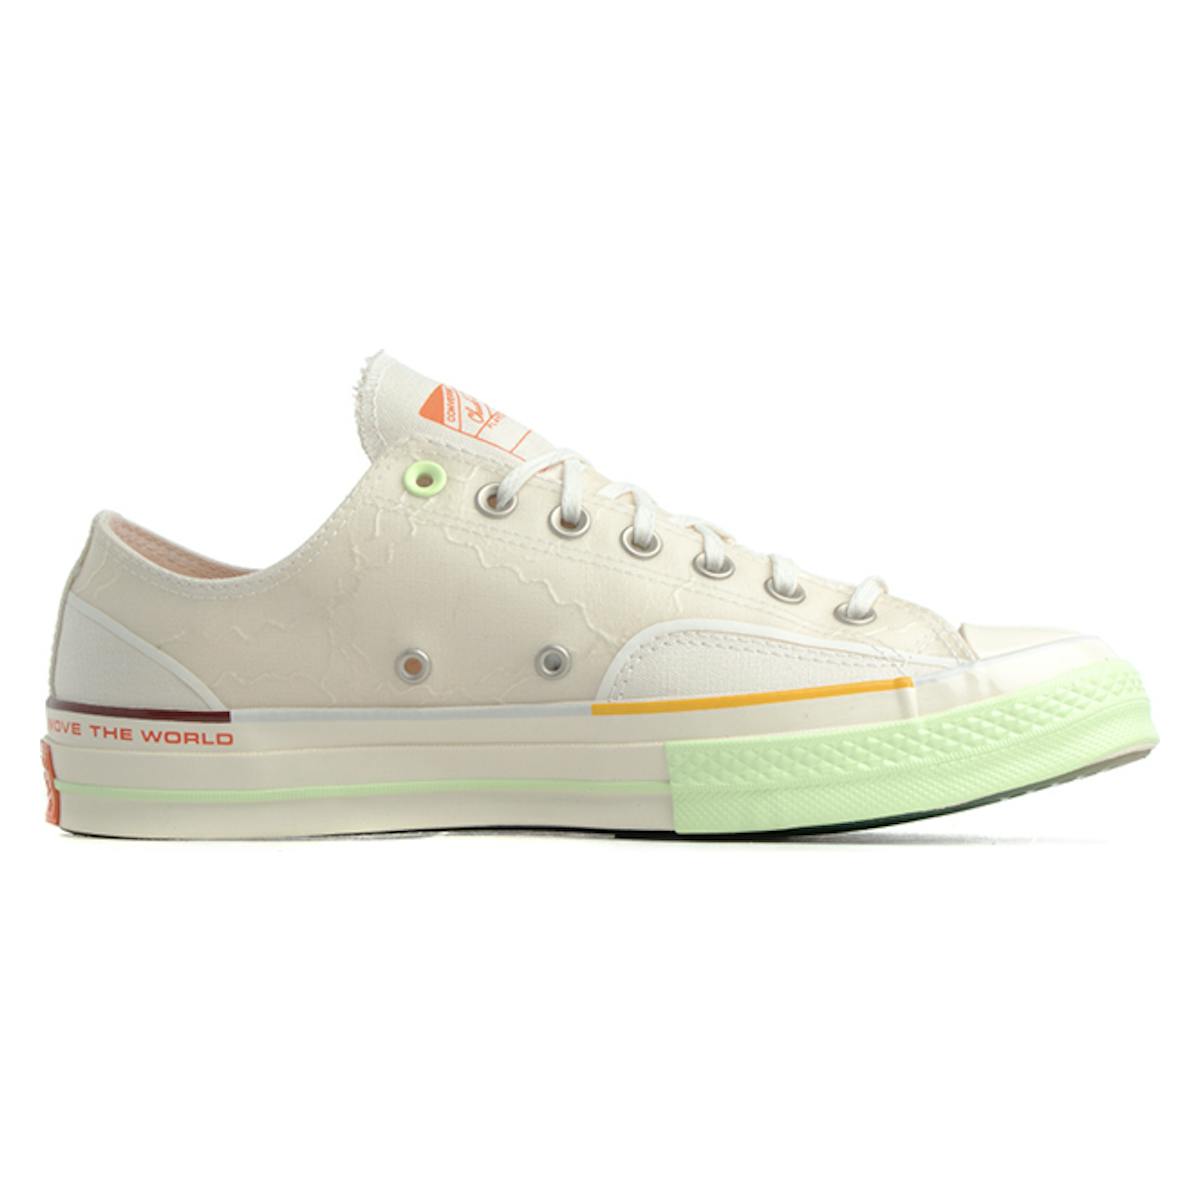 Pigalle x Converse Chuck 70 OX "White"